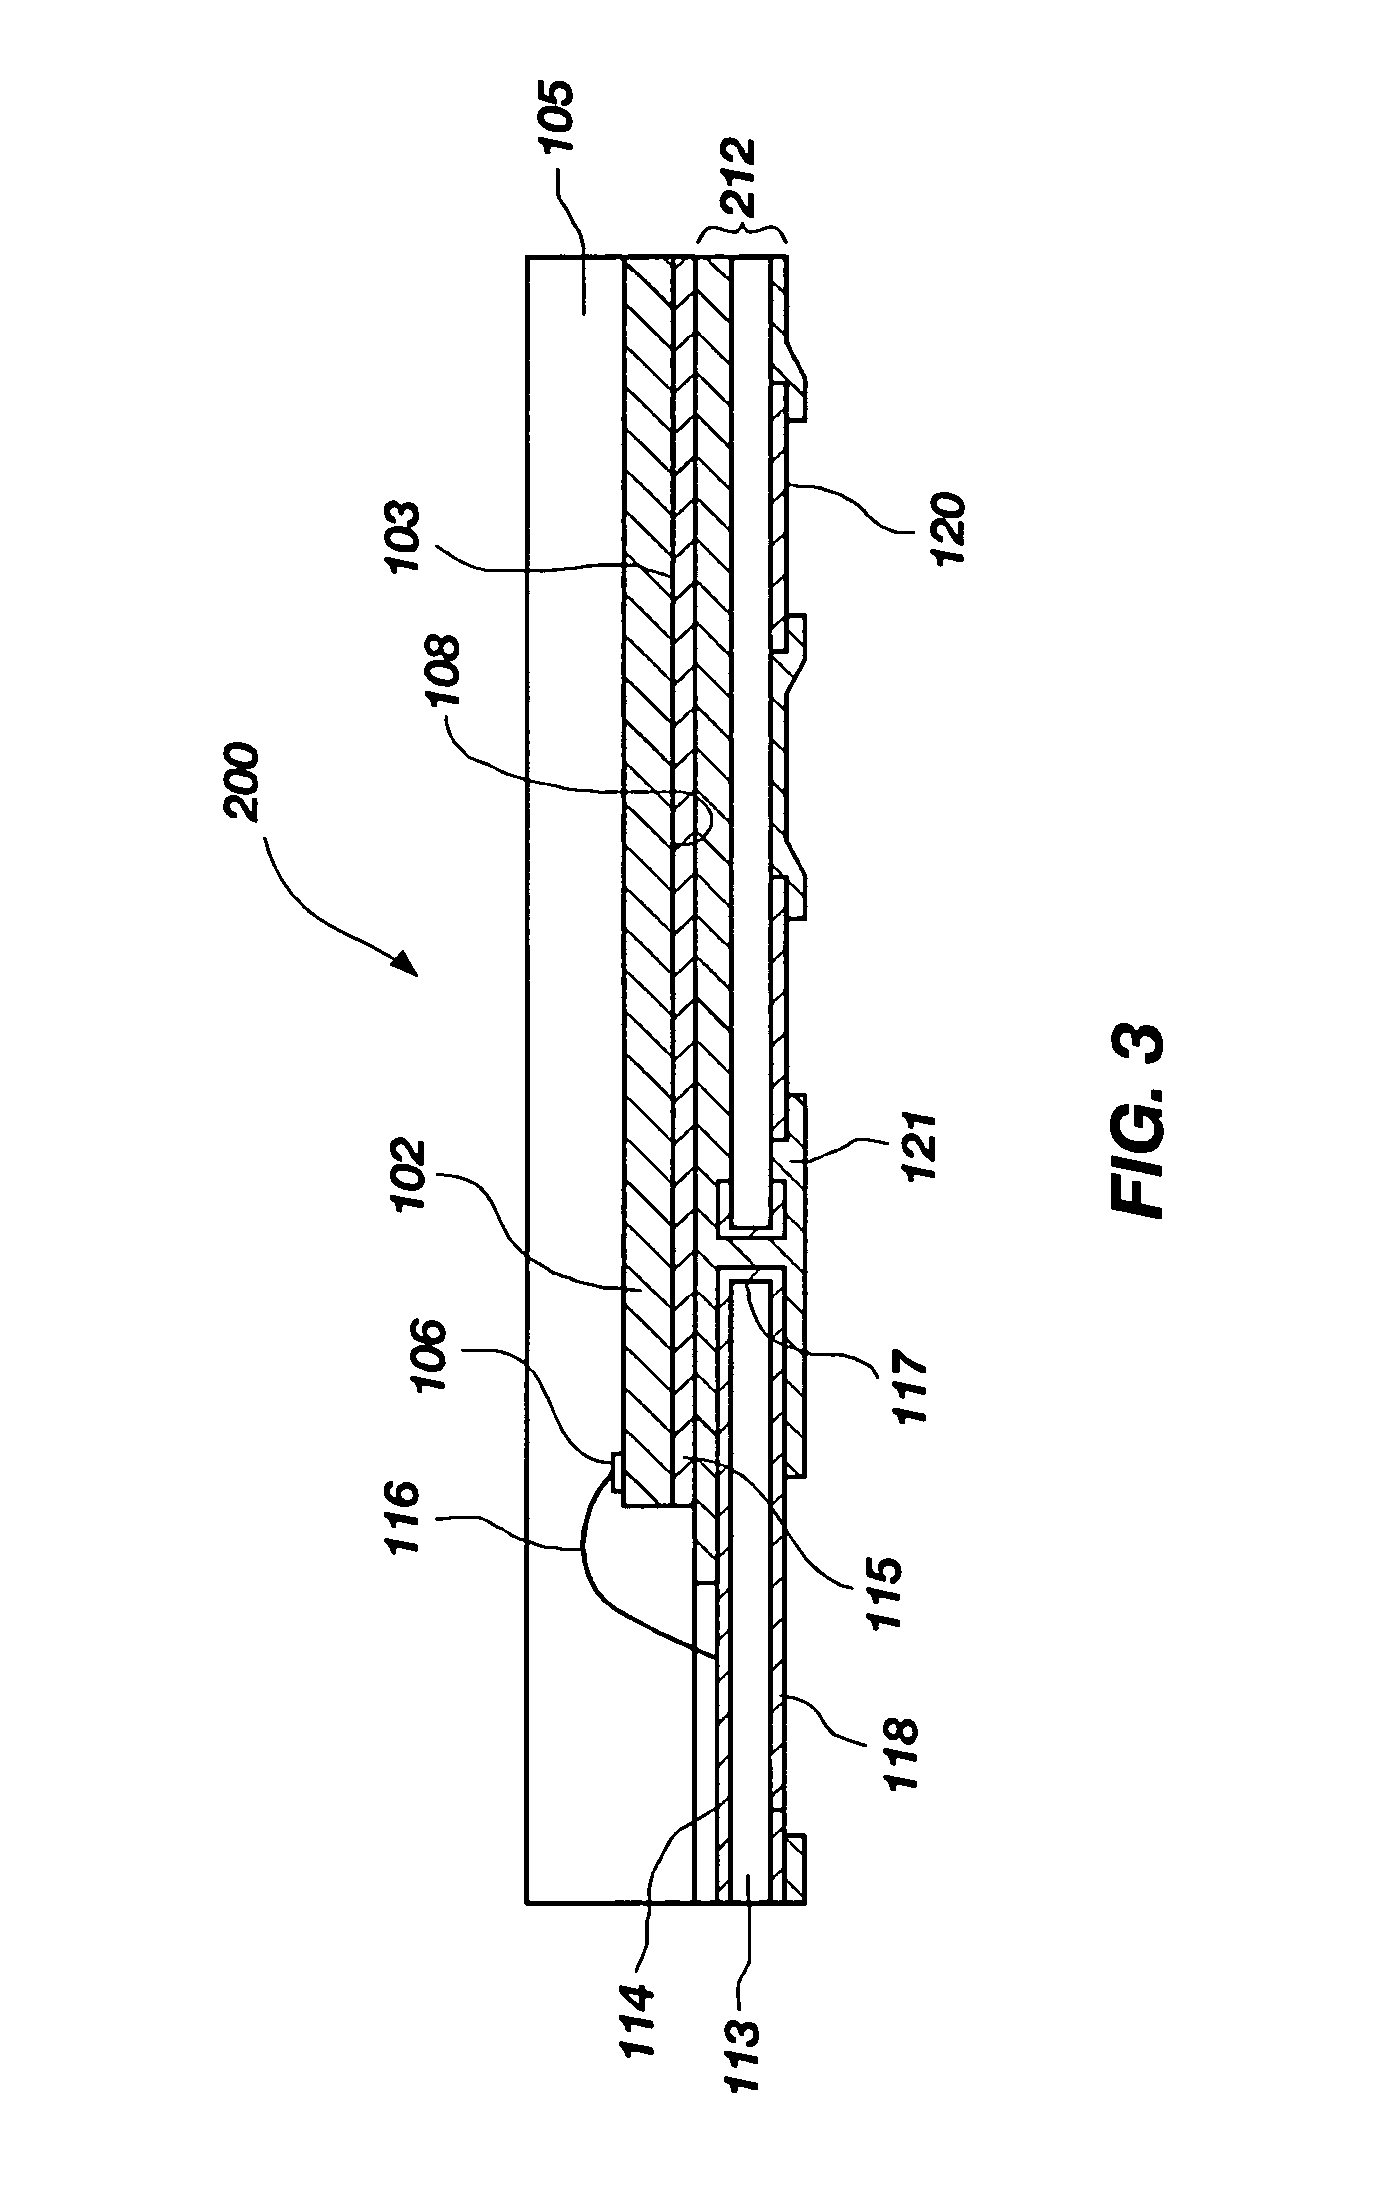 Land grid array semiconductor device packages